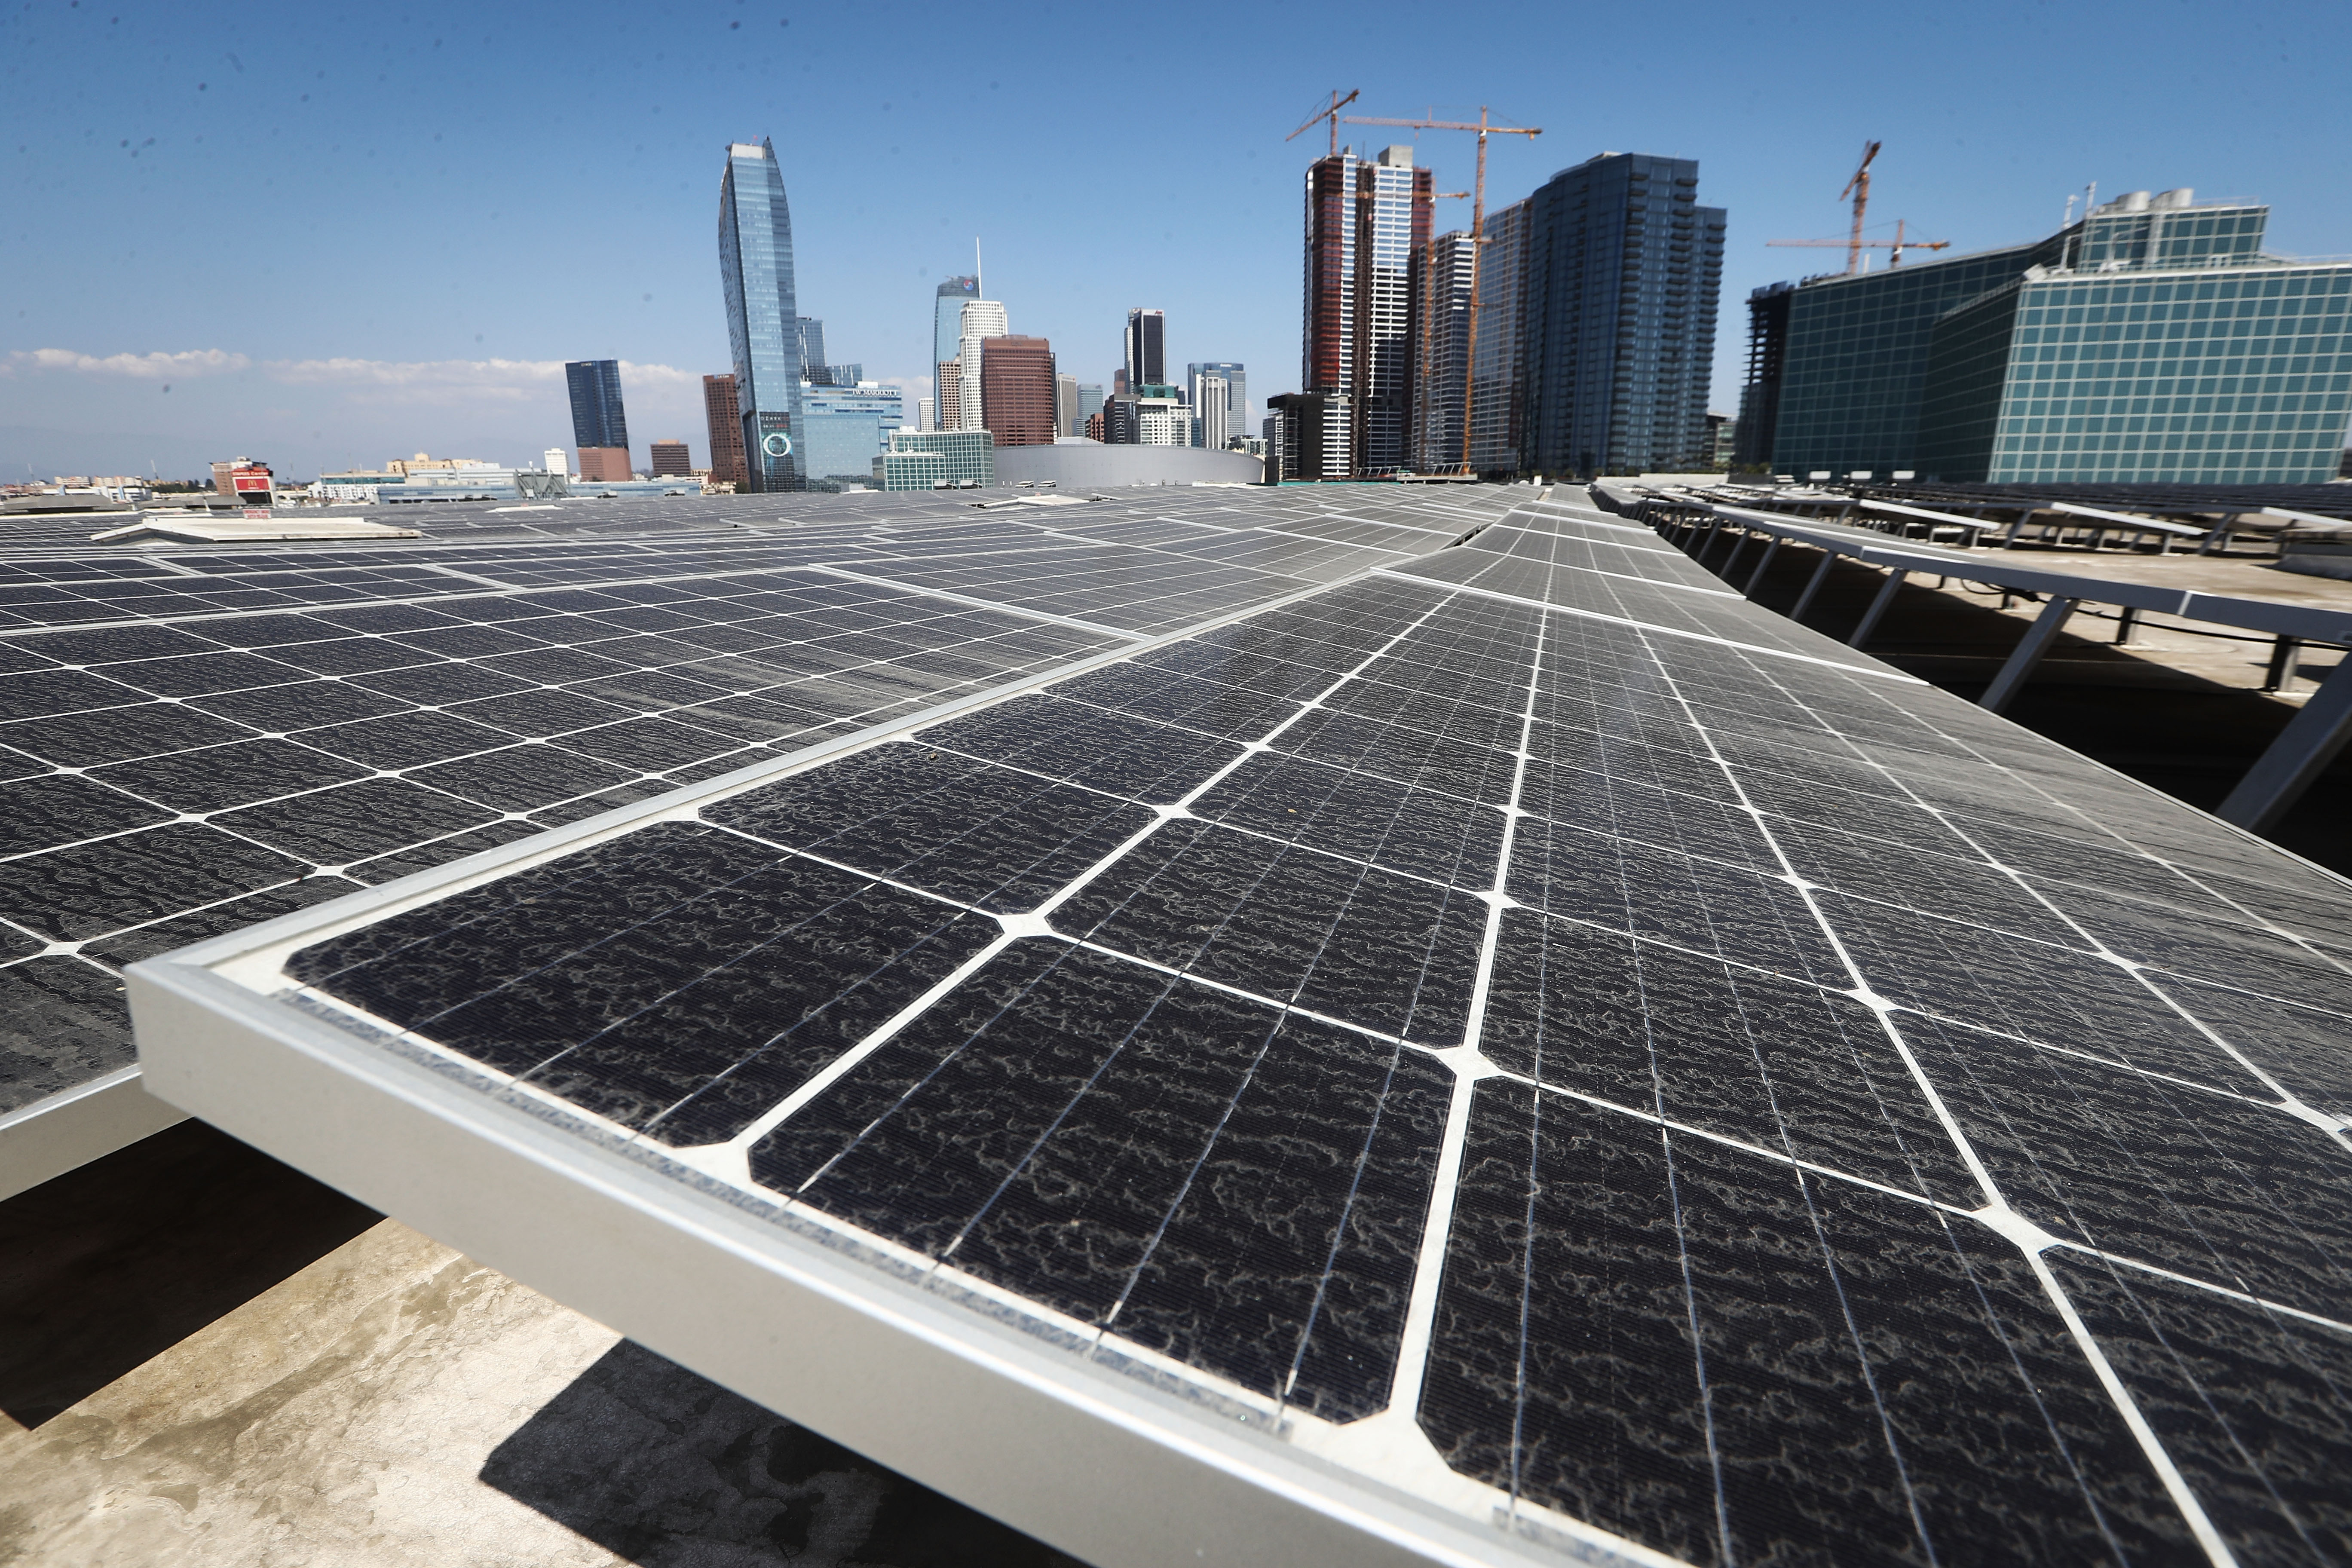 A large solar panel array, with a city skyline in the background.